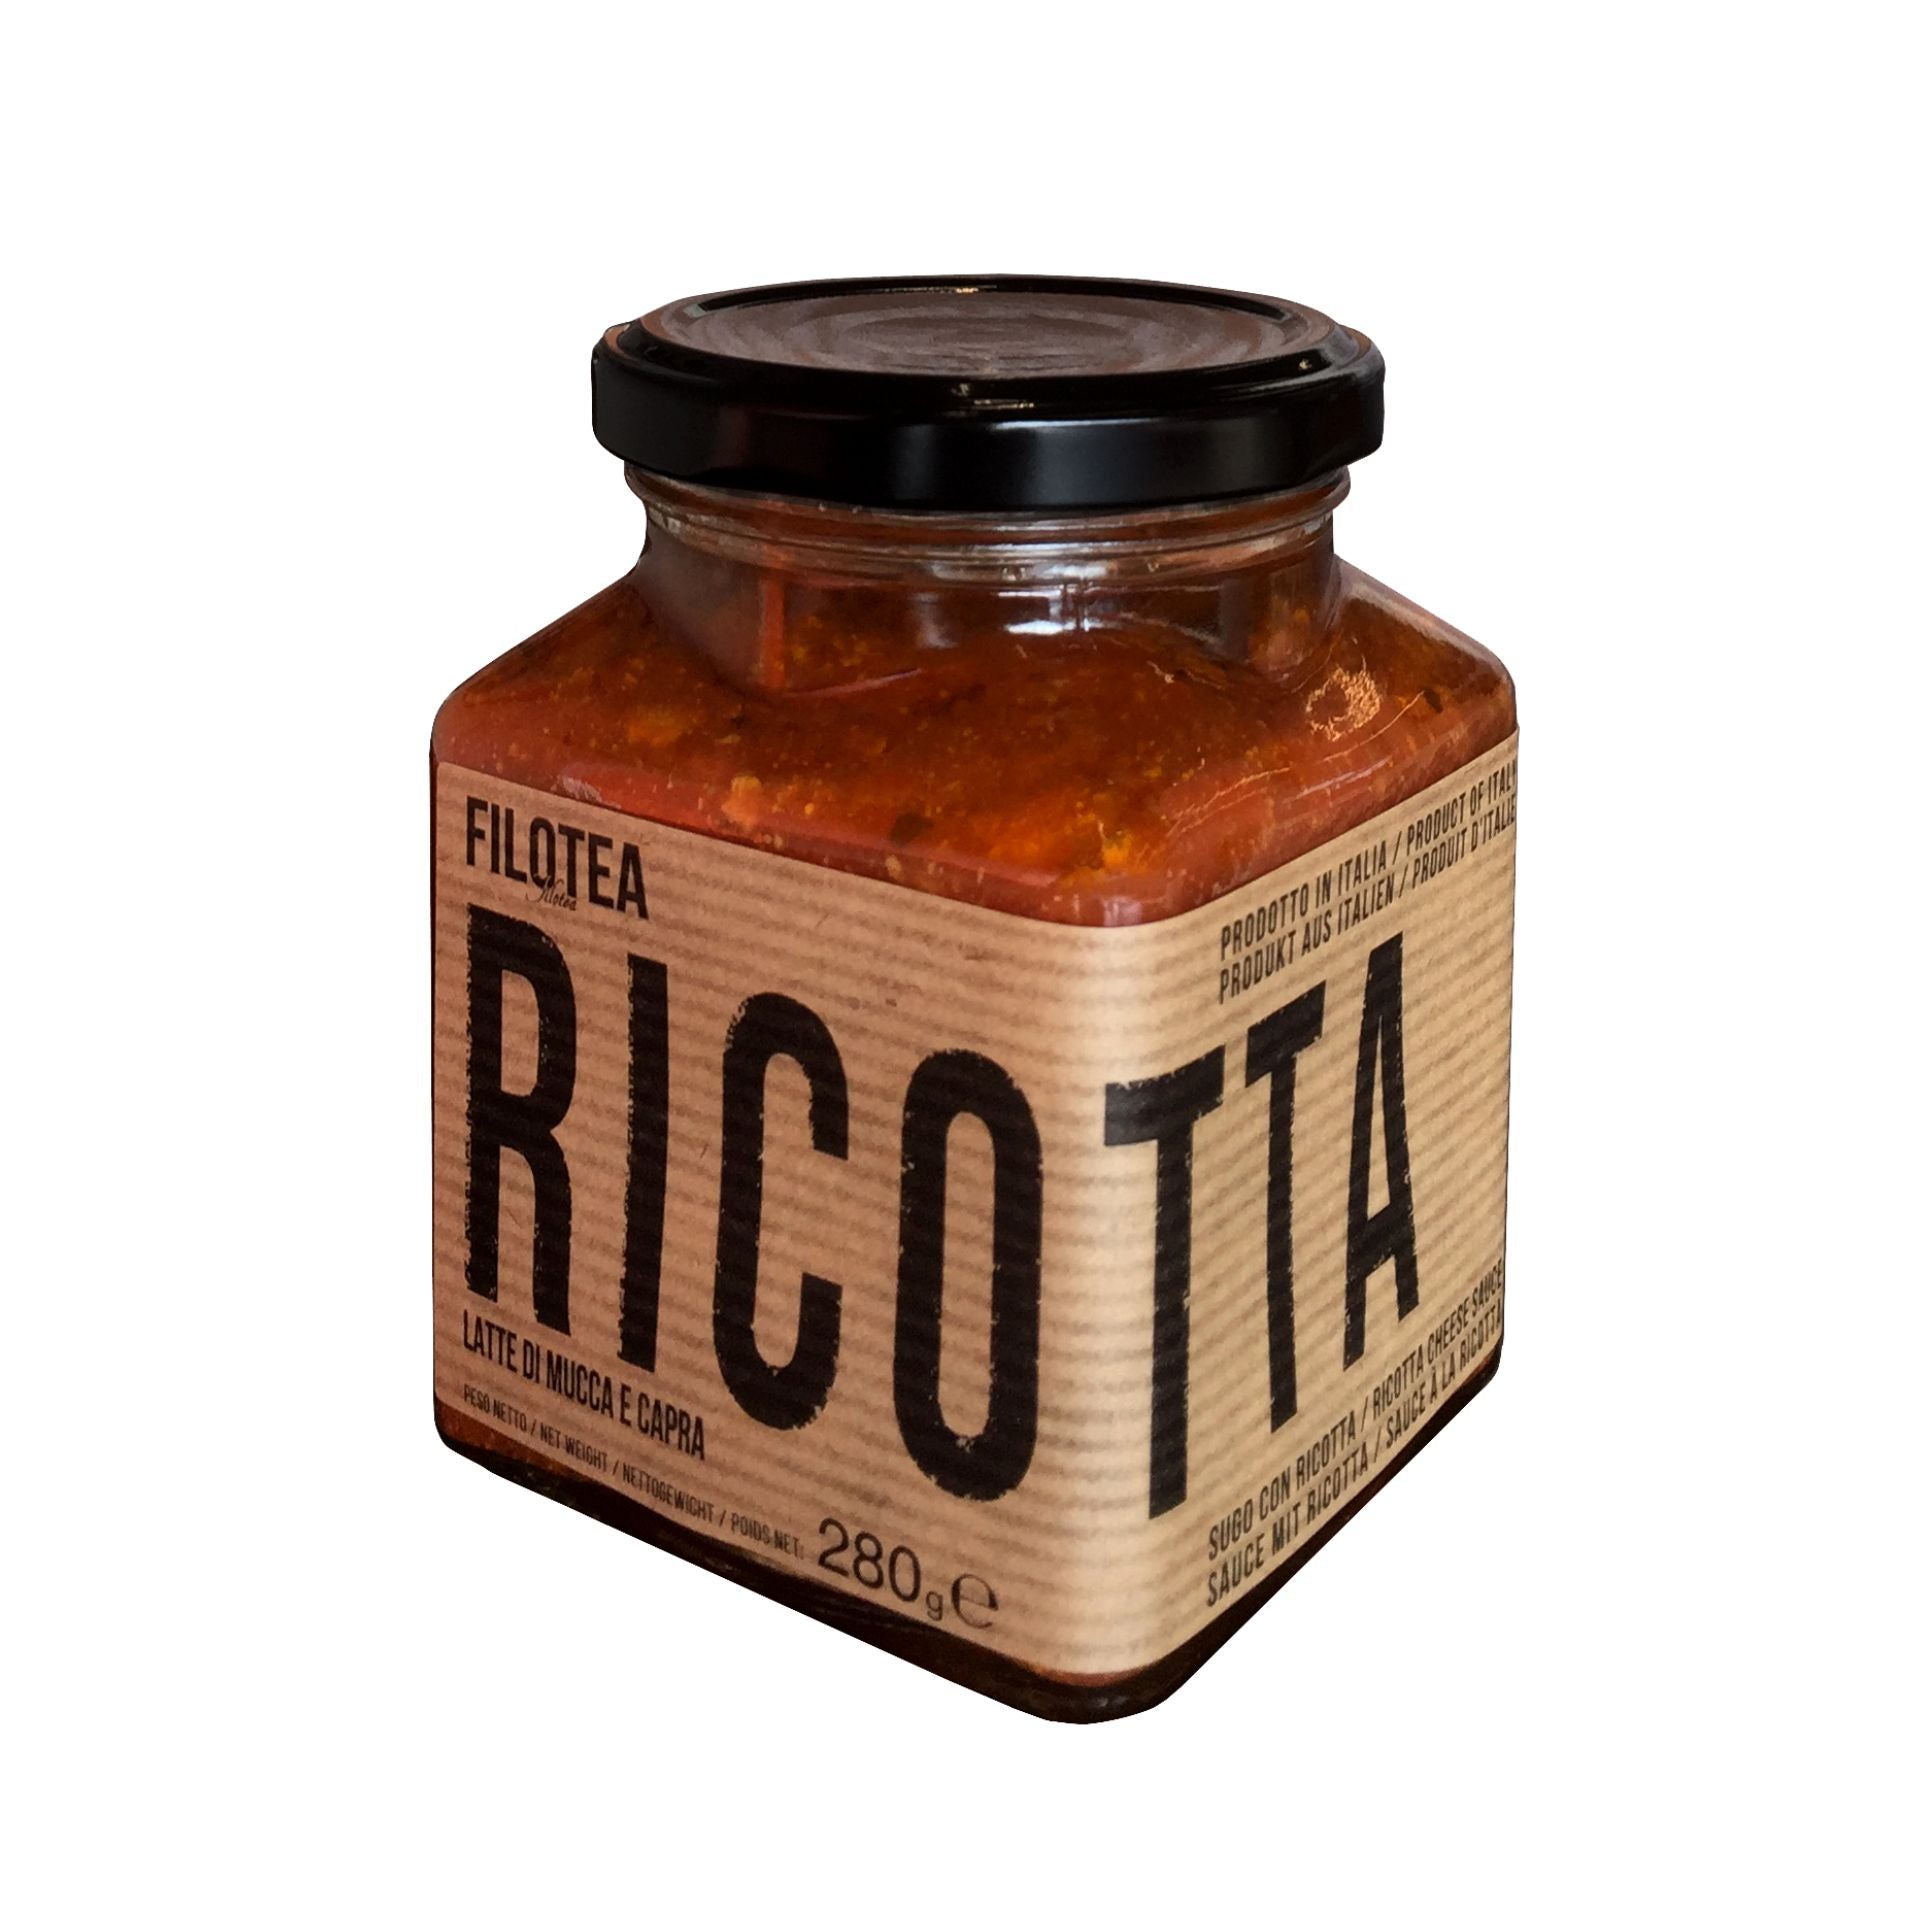 Filotea Ricotta Cheese Pasta Sauce 280g  | Imported and distributed in the UK by Just Gourmet Foods